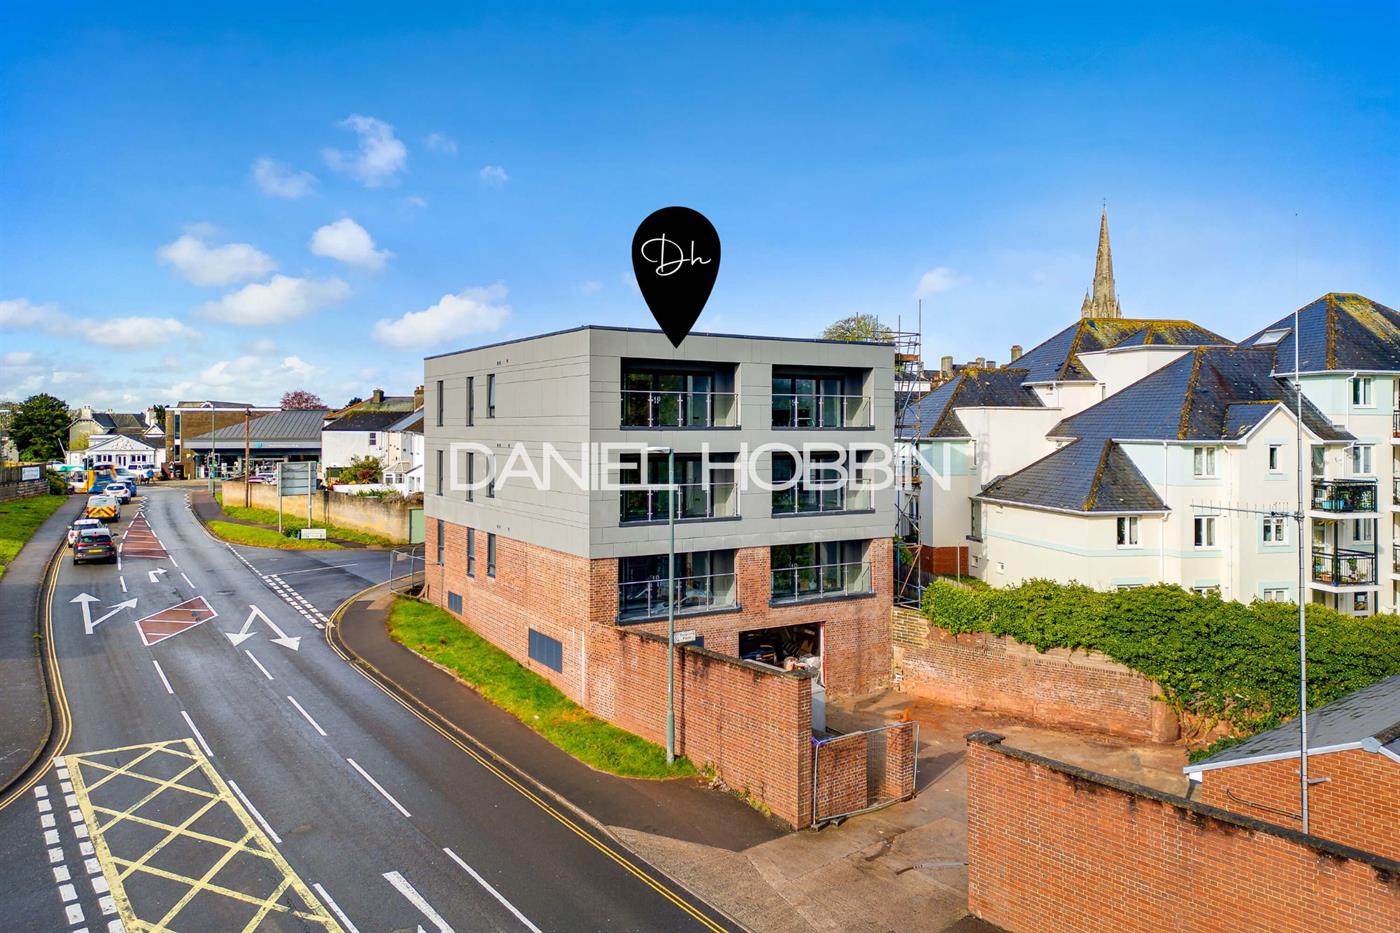 2 Bedroom Apartment for Sale: Somers Lodge, Chilcote Close, St Marychurch, Torquay, TQ1 4QT